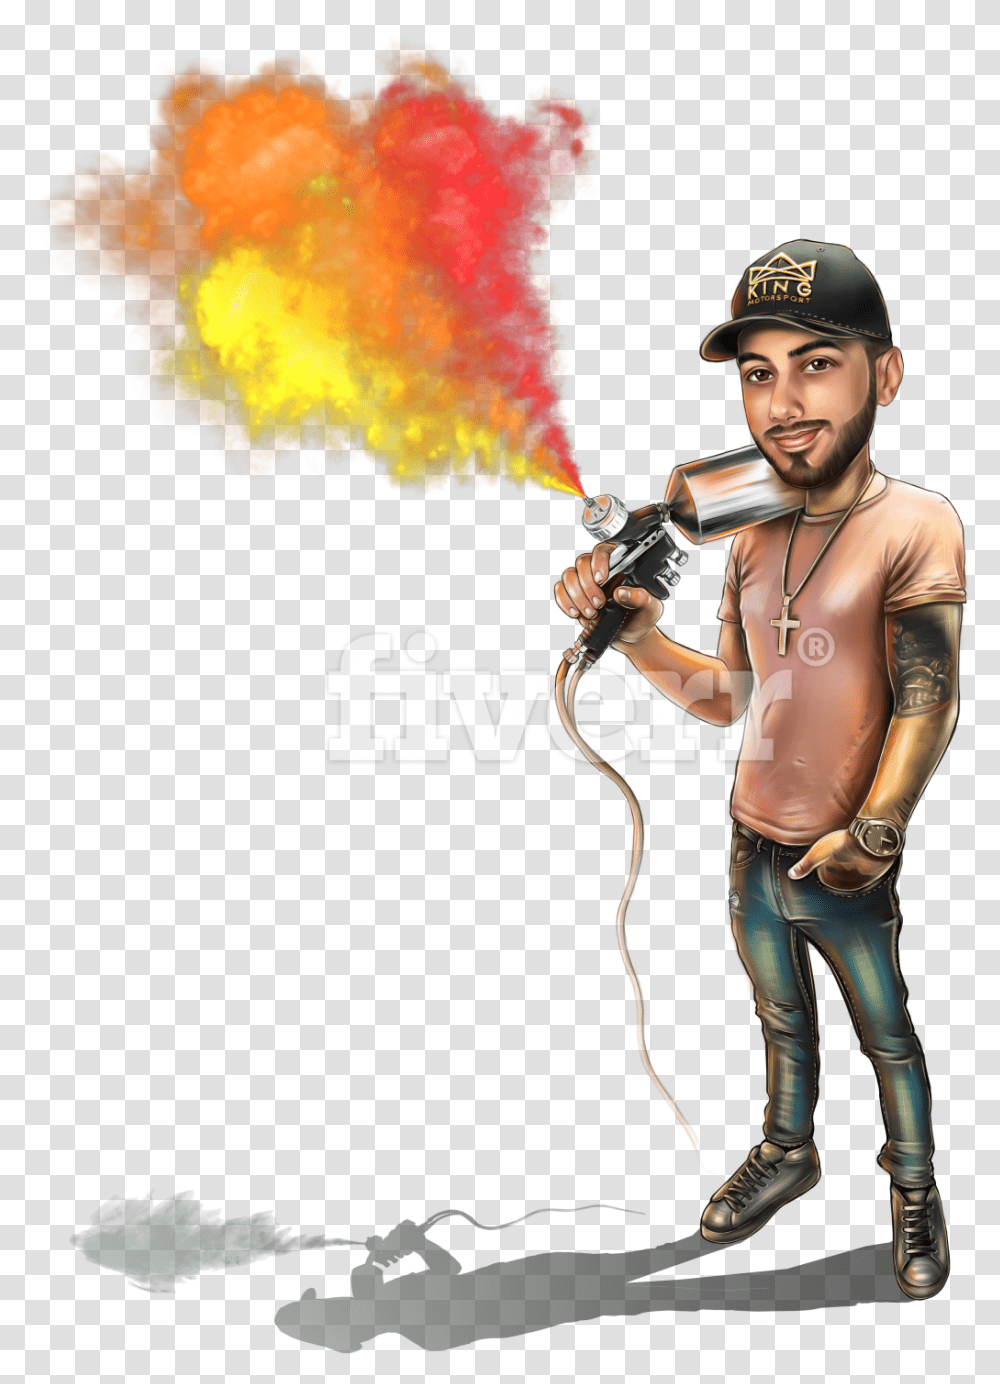 Shooting Drawing Cartoon Soldier, Person, Human, Fire, Flame Transparent Png